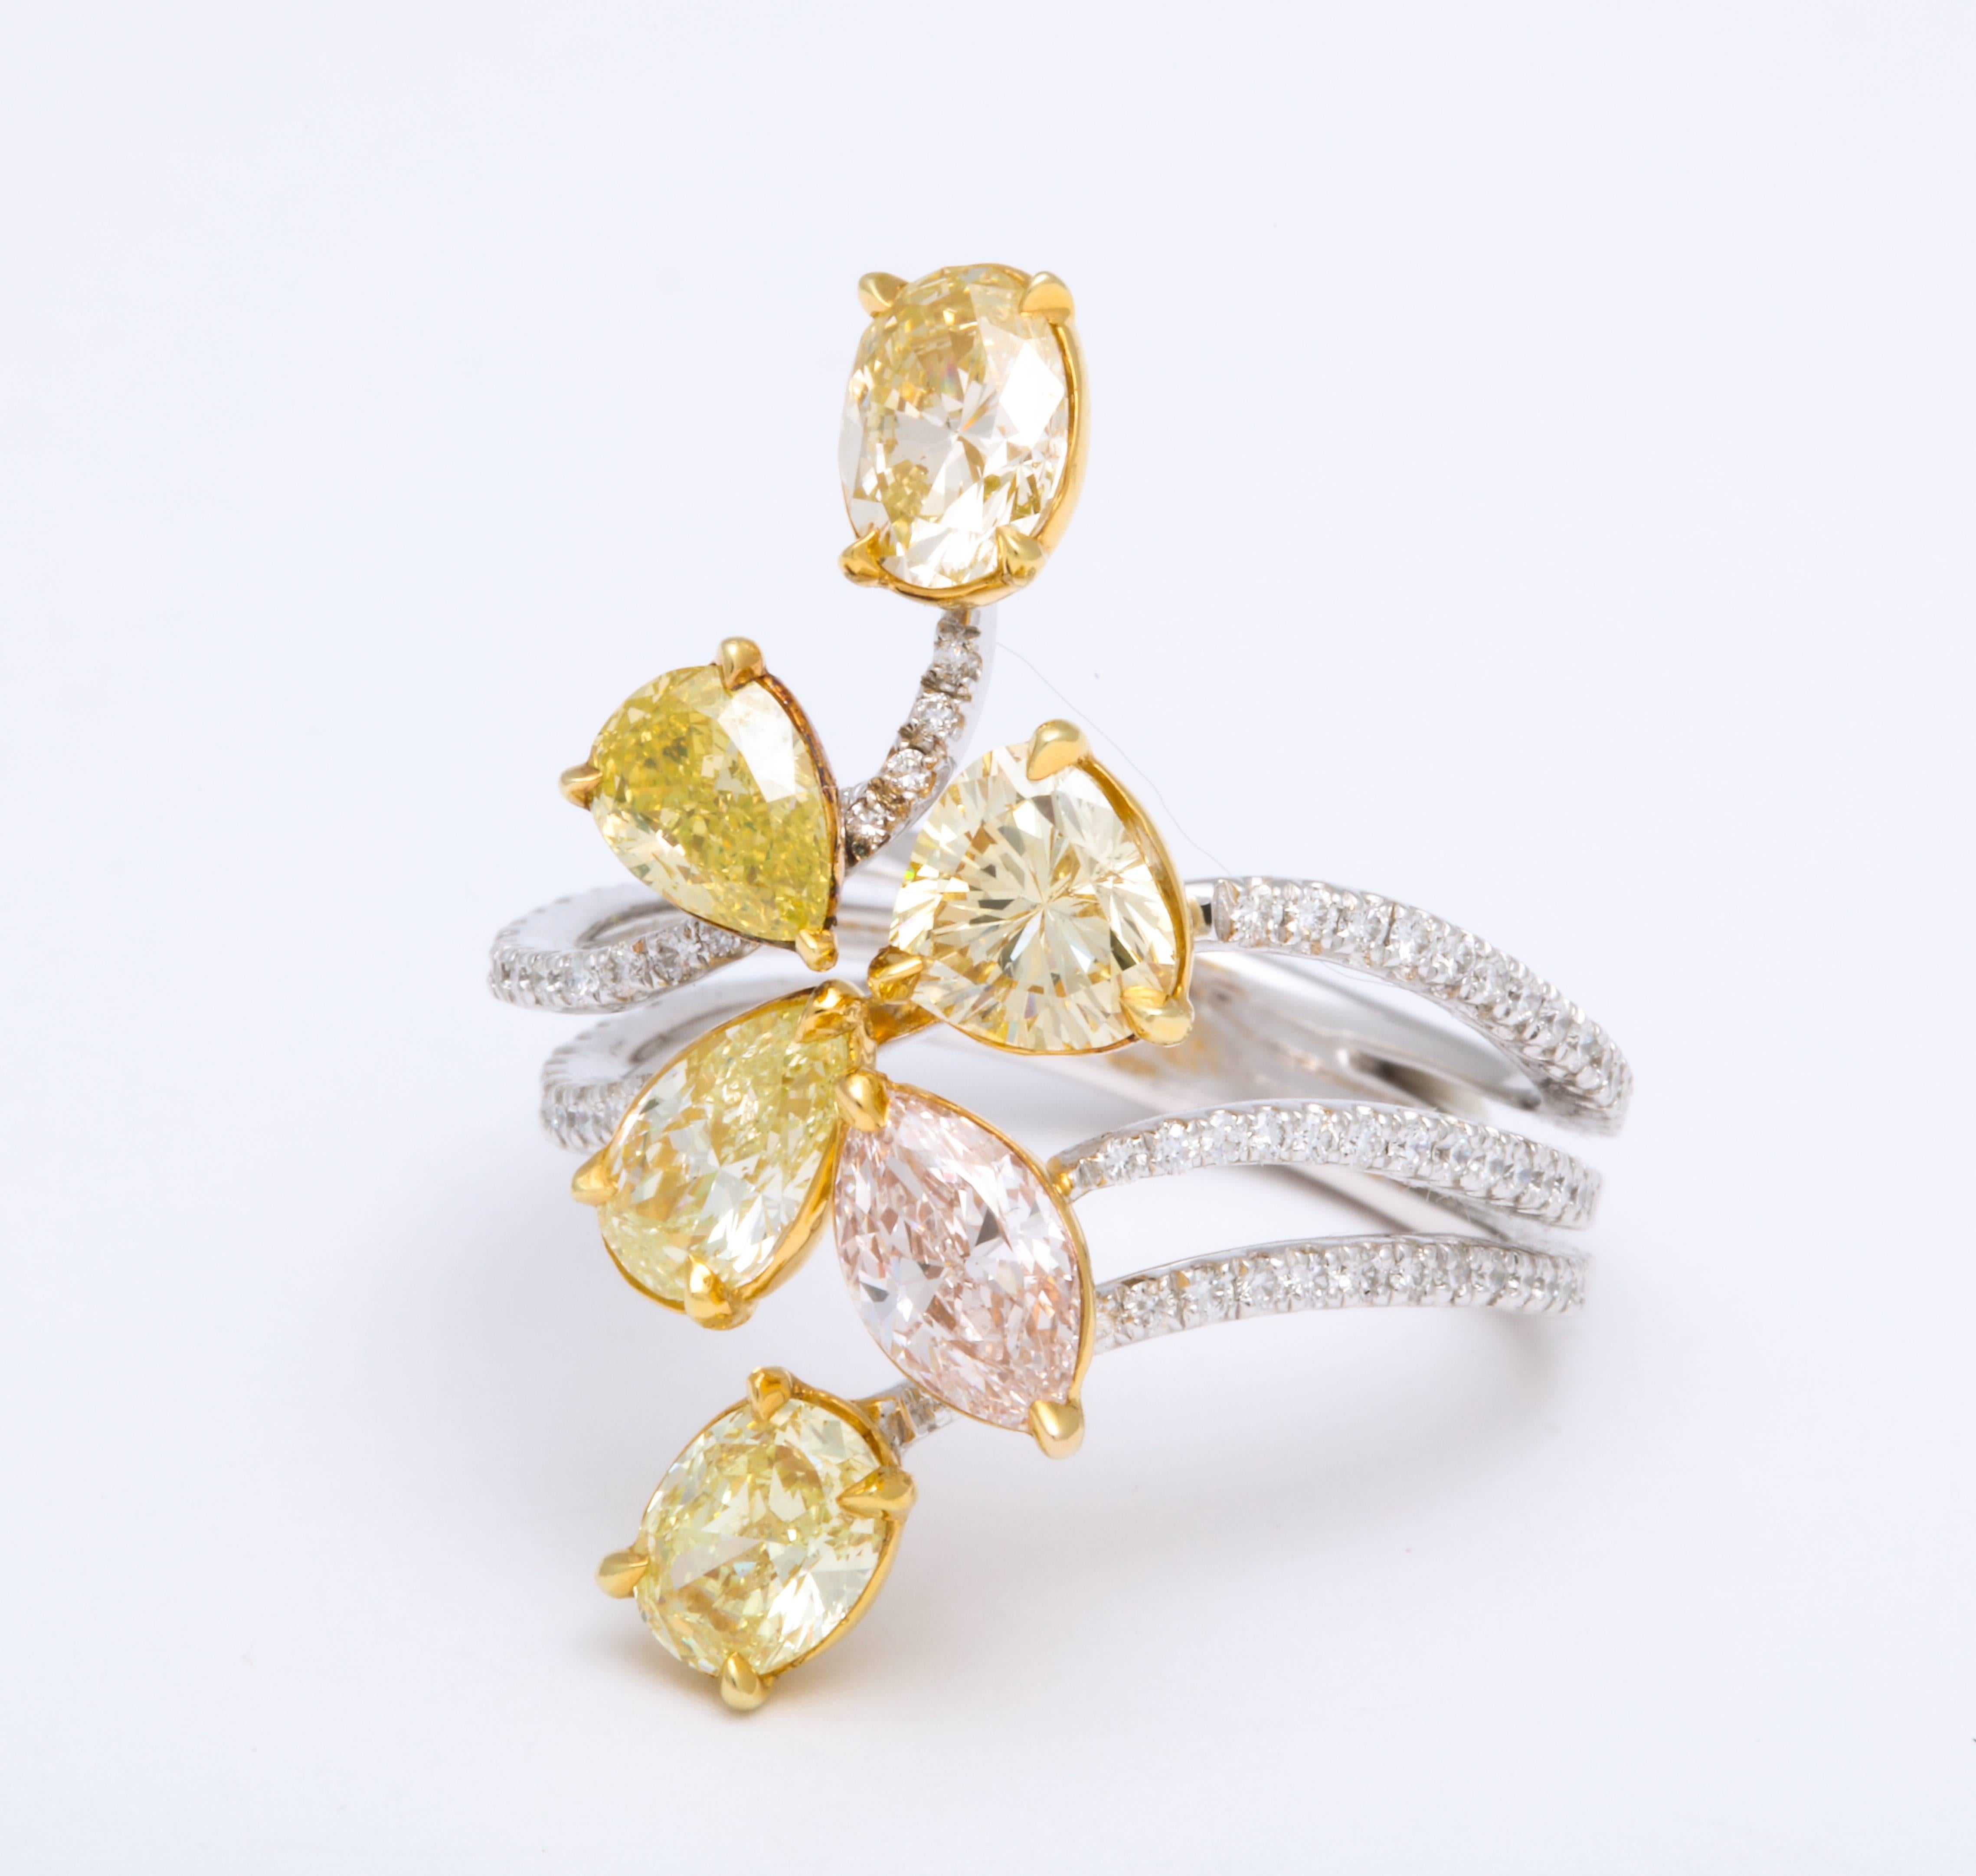 Free-form cluster of six fancy shape, natural multi color diamonds weighing 3.17 carats, prong-set on 18K Yellow Gold floating on contemporary 18K White Gold triple fork shank partially set with micro pave-set diamonds: 0.40 carats. Made to fit a